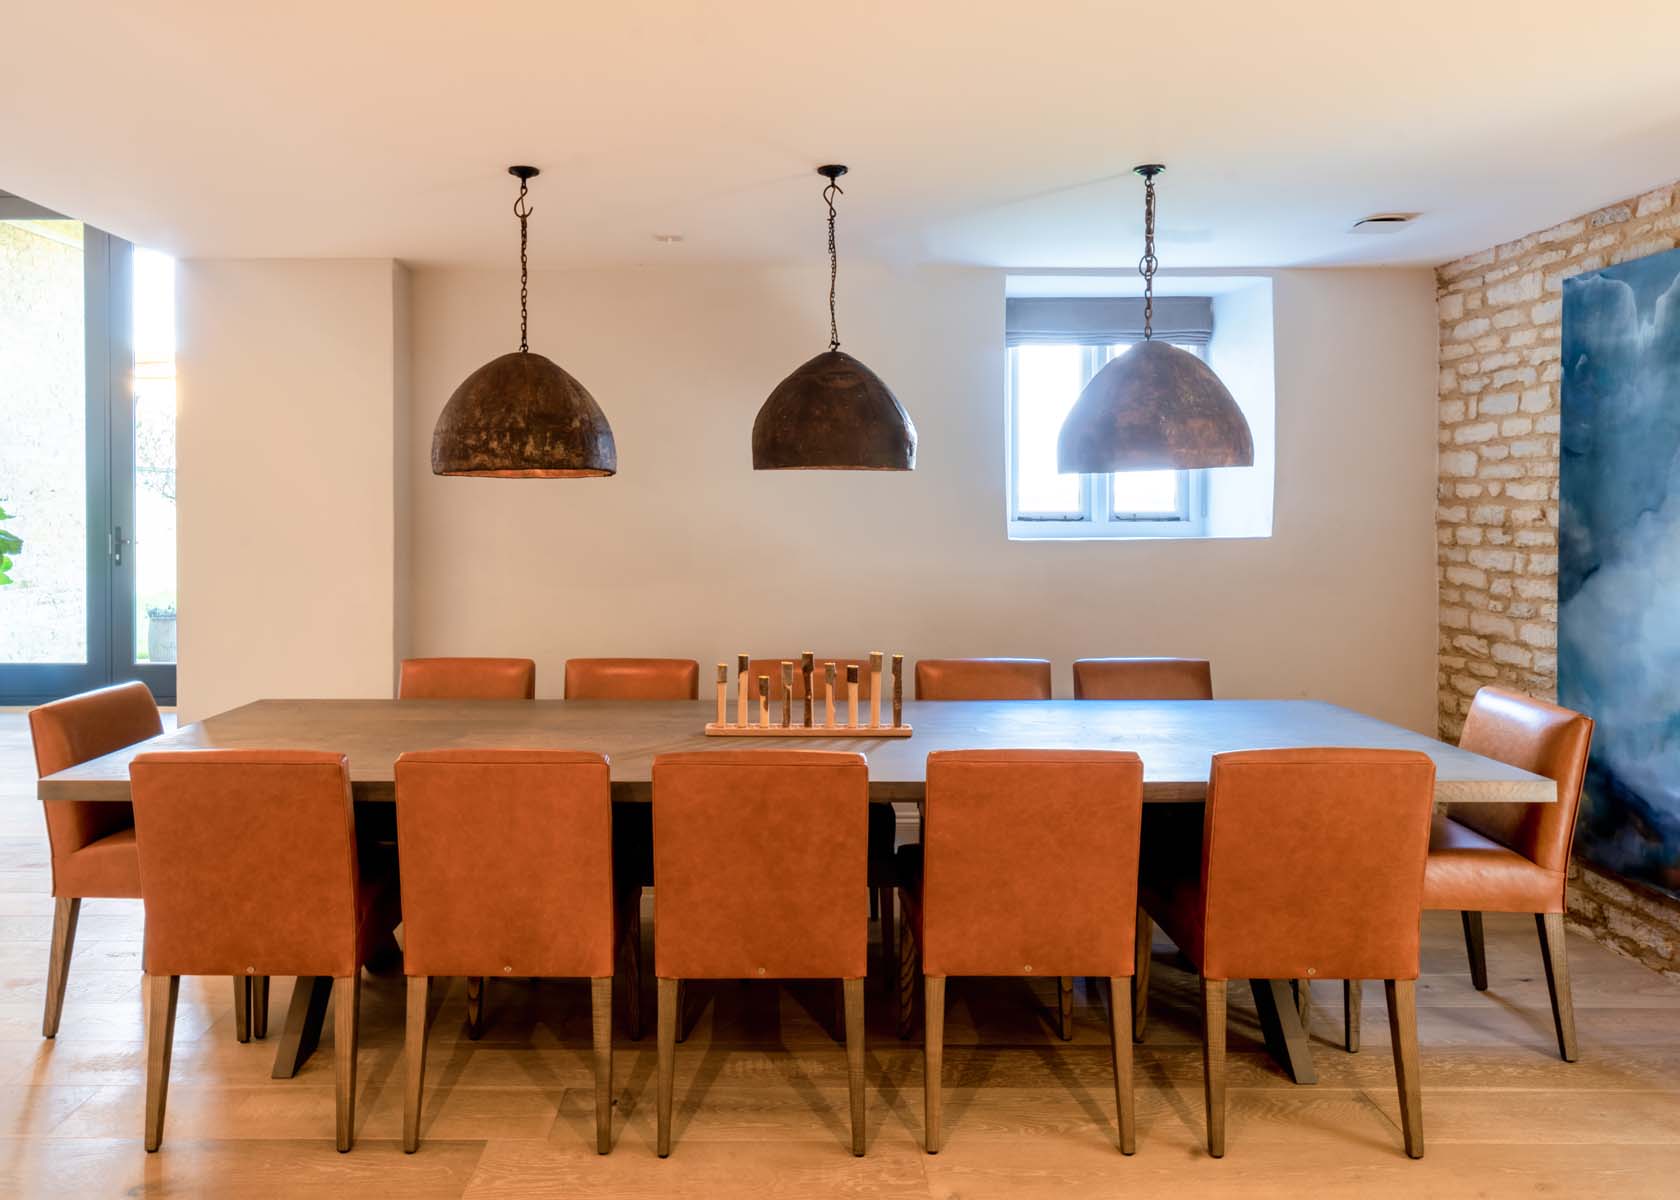 A minimal dining table with tan leather chairs